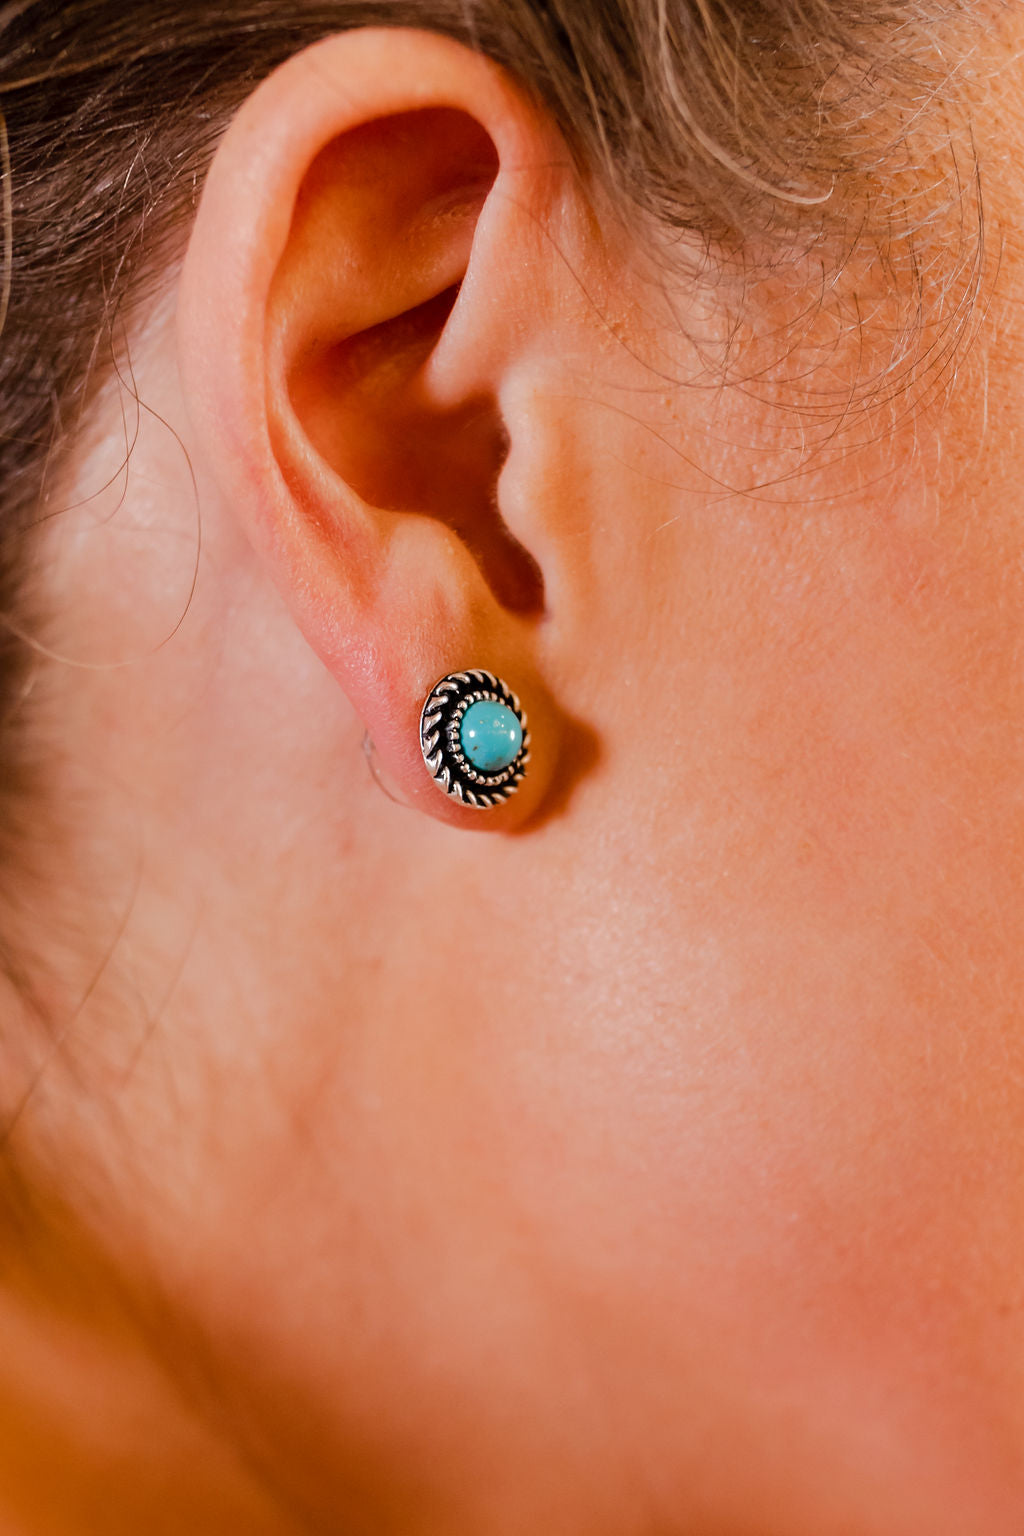 Tiny Round Turquoise Stud Earrings